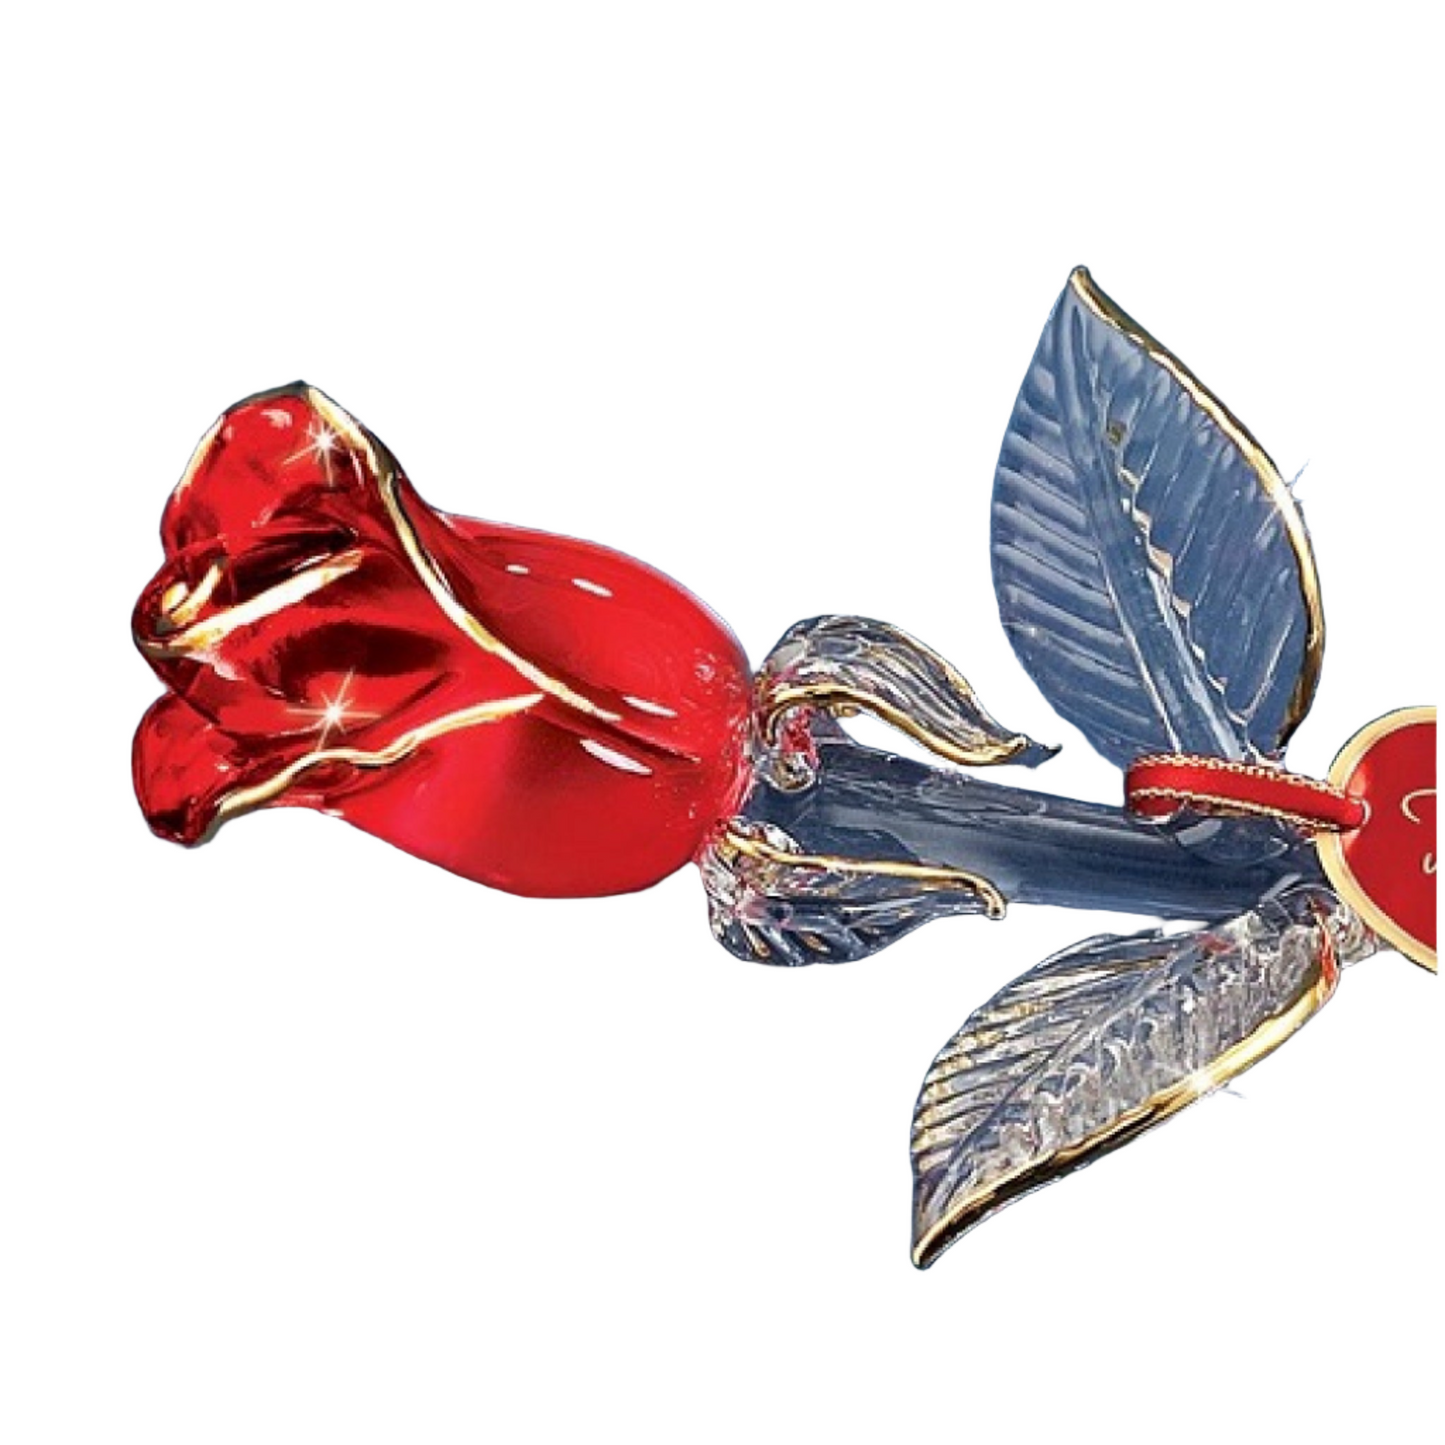 Glass Baron "I Love You" Red and Gold Rose Large Figurine